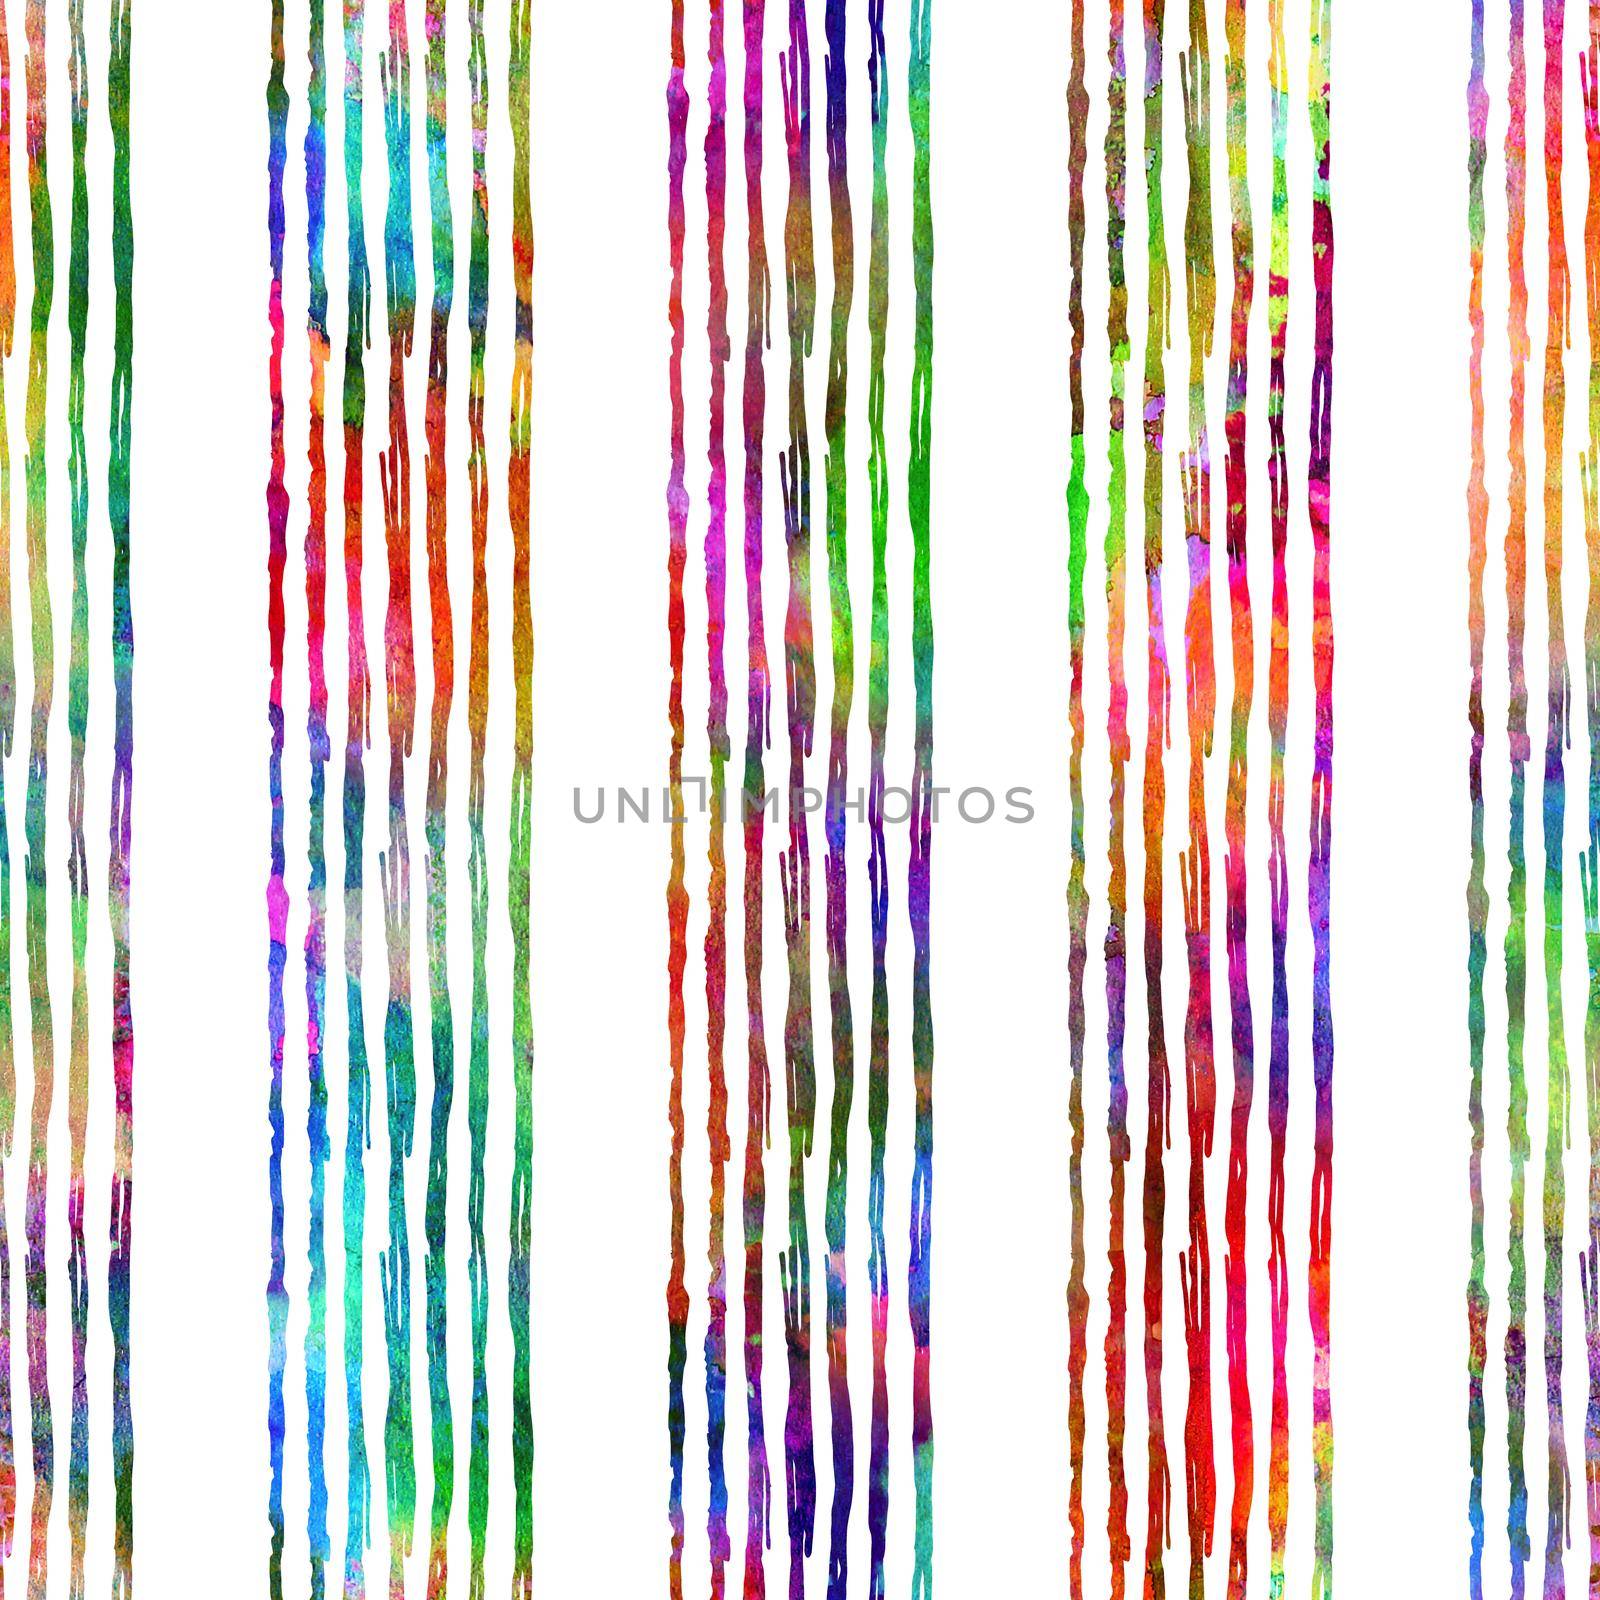 Brush Stroke Line Stripe Geometric Grung Pattern Seamless in Rainbow Color Background. Gunge Collage Watercolor Texture for Teen and School Kids Fabric Prints Grange Design with lines by DesignAB